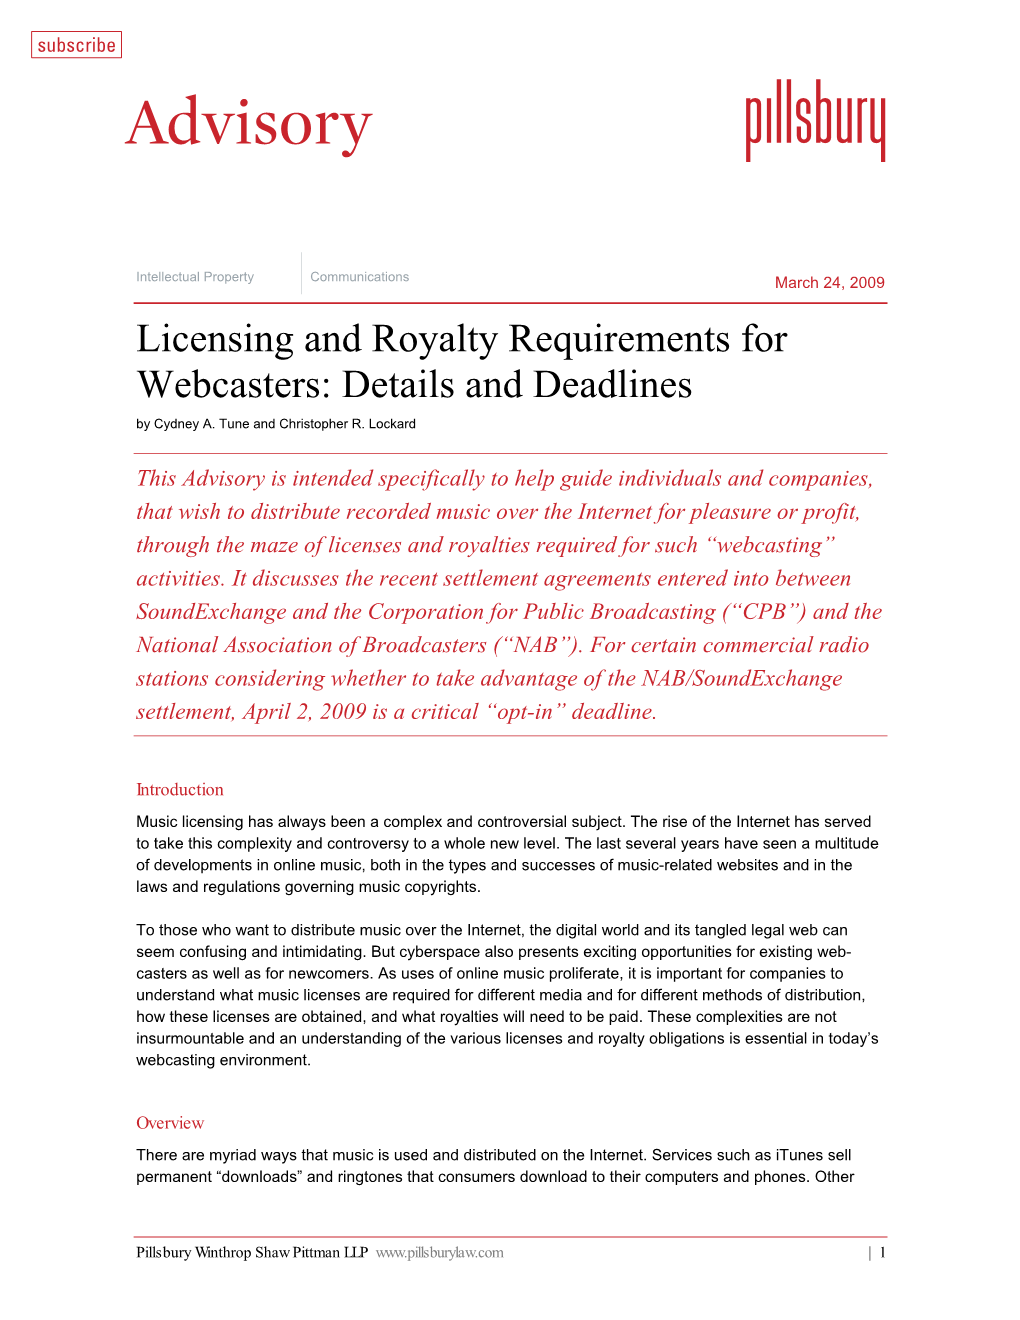 Licensing and Royalty Requirements for Webcasters: Details and Deadlines by Cydney A